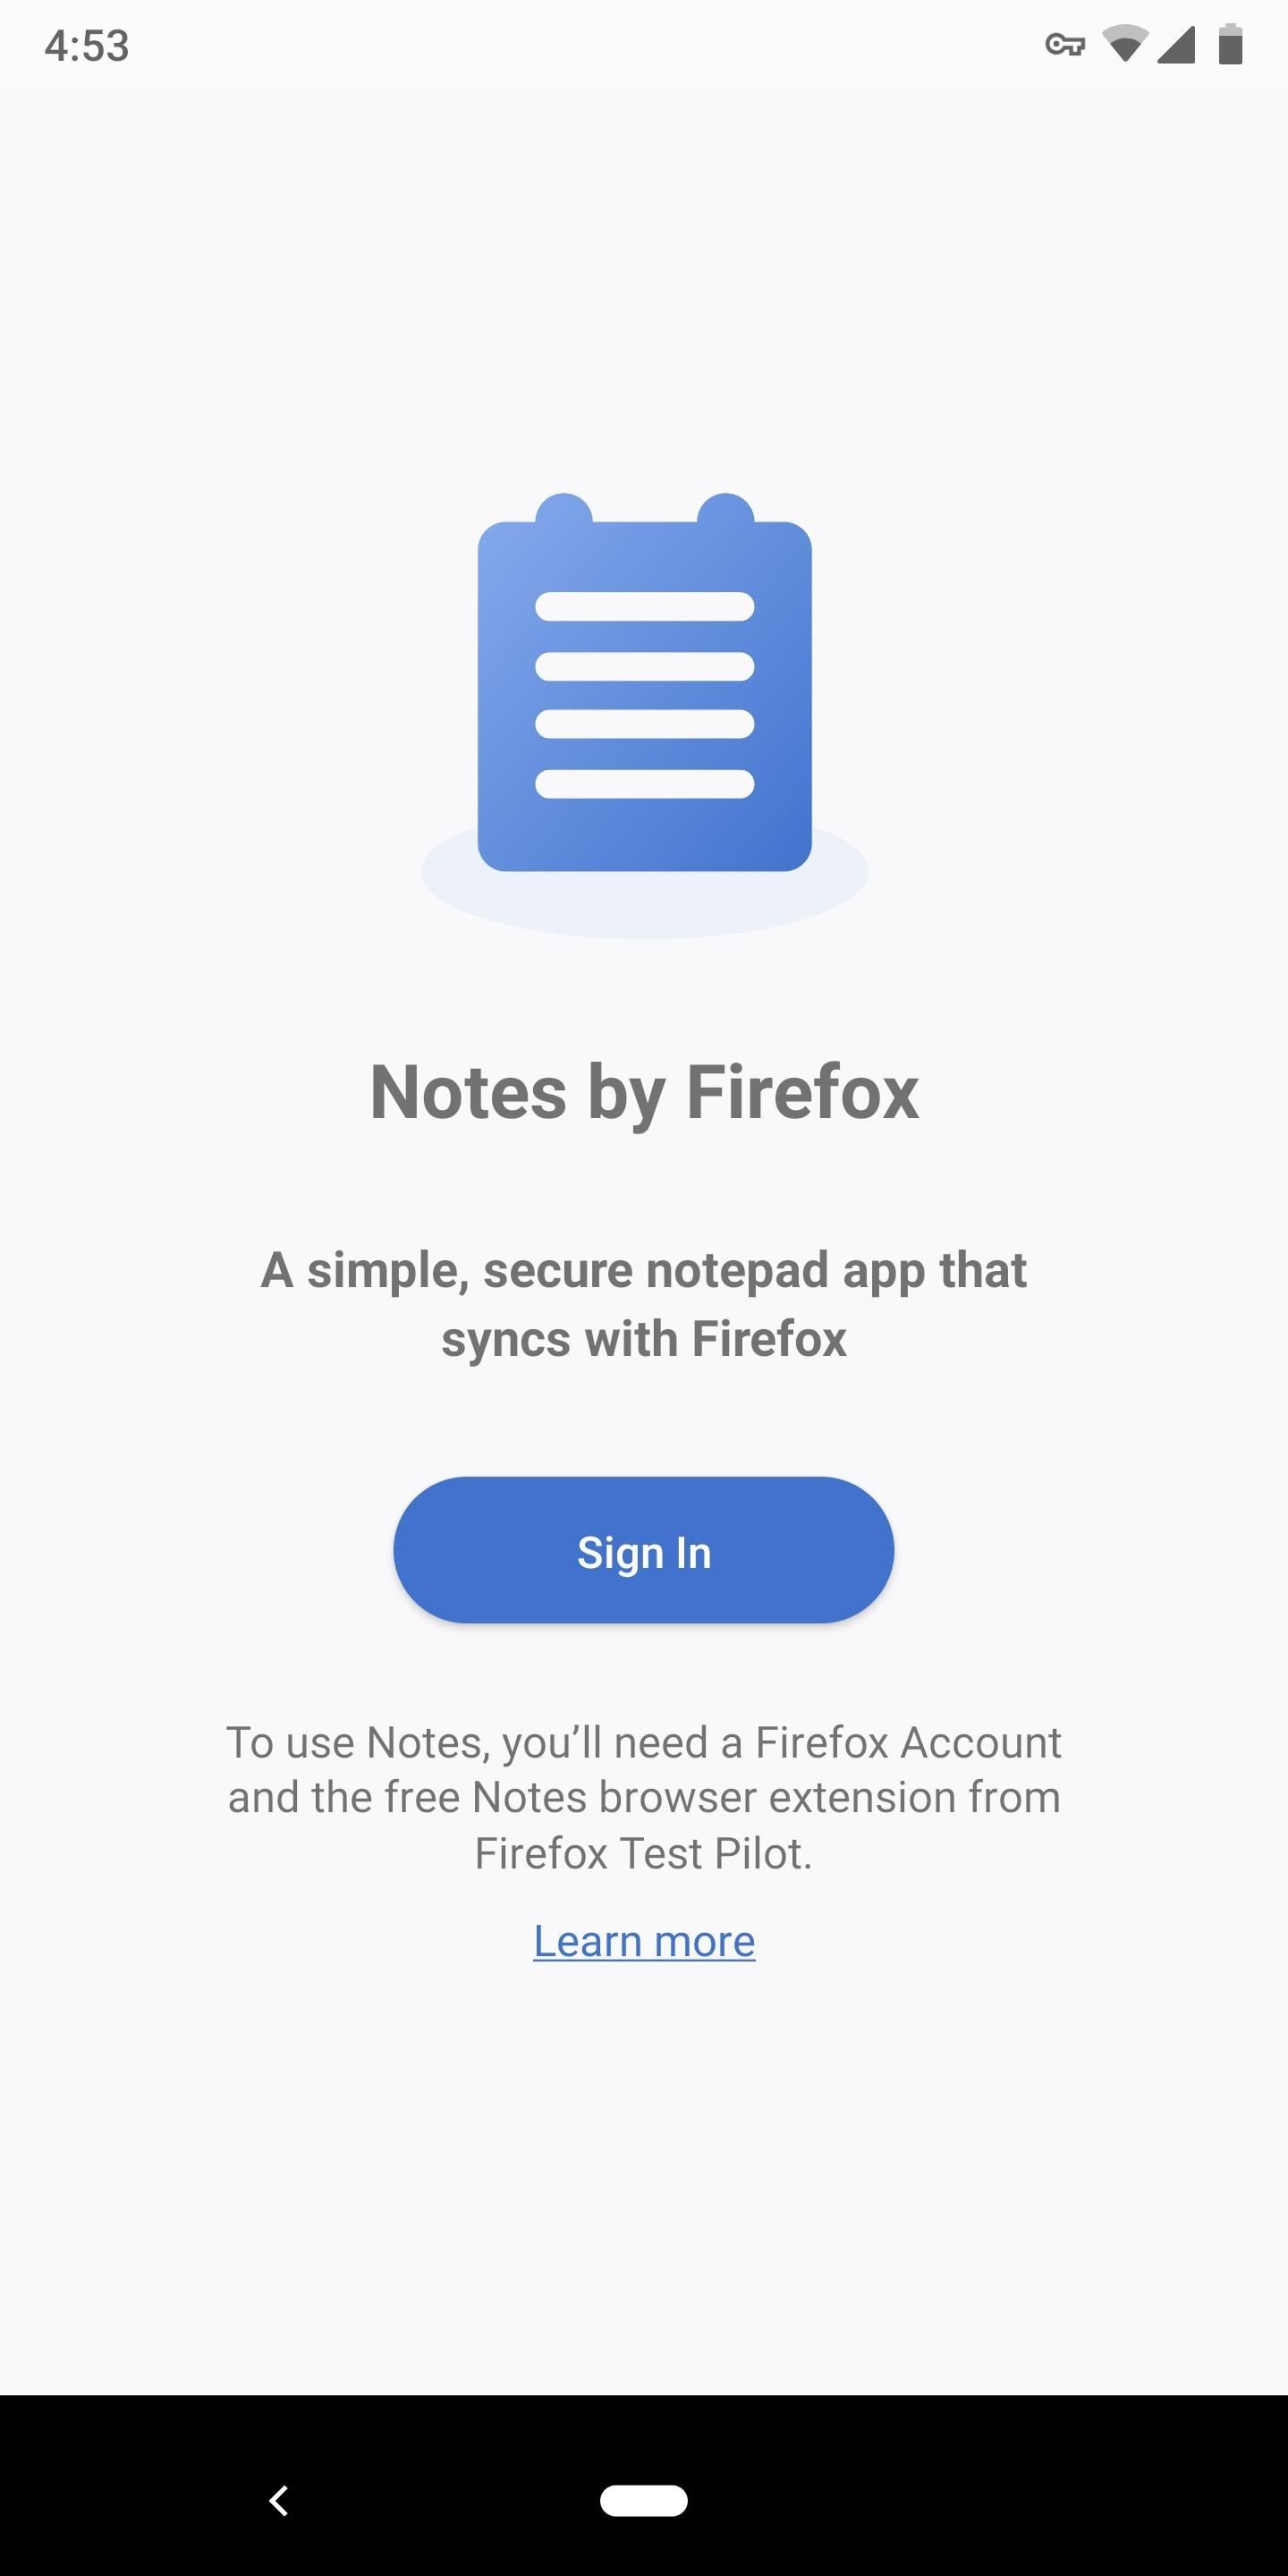 How to Use Firefox's Secure 'Notes' App to Sync Lists & Other Notes to Your Desktop Browser